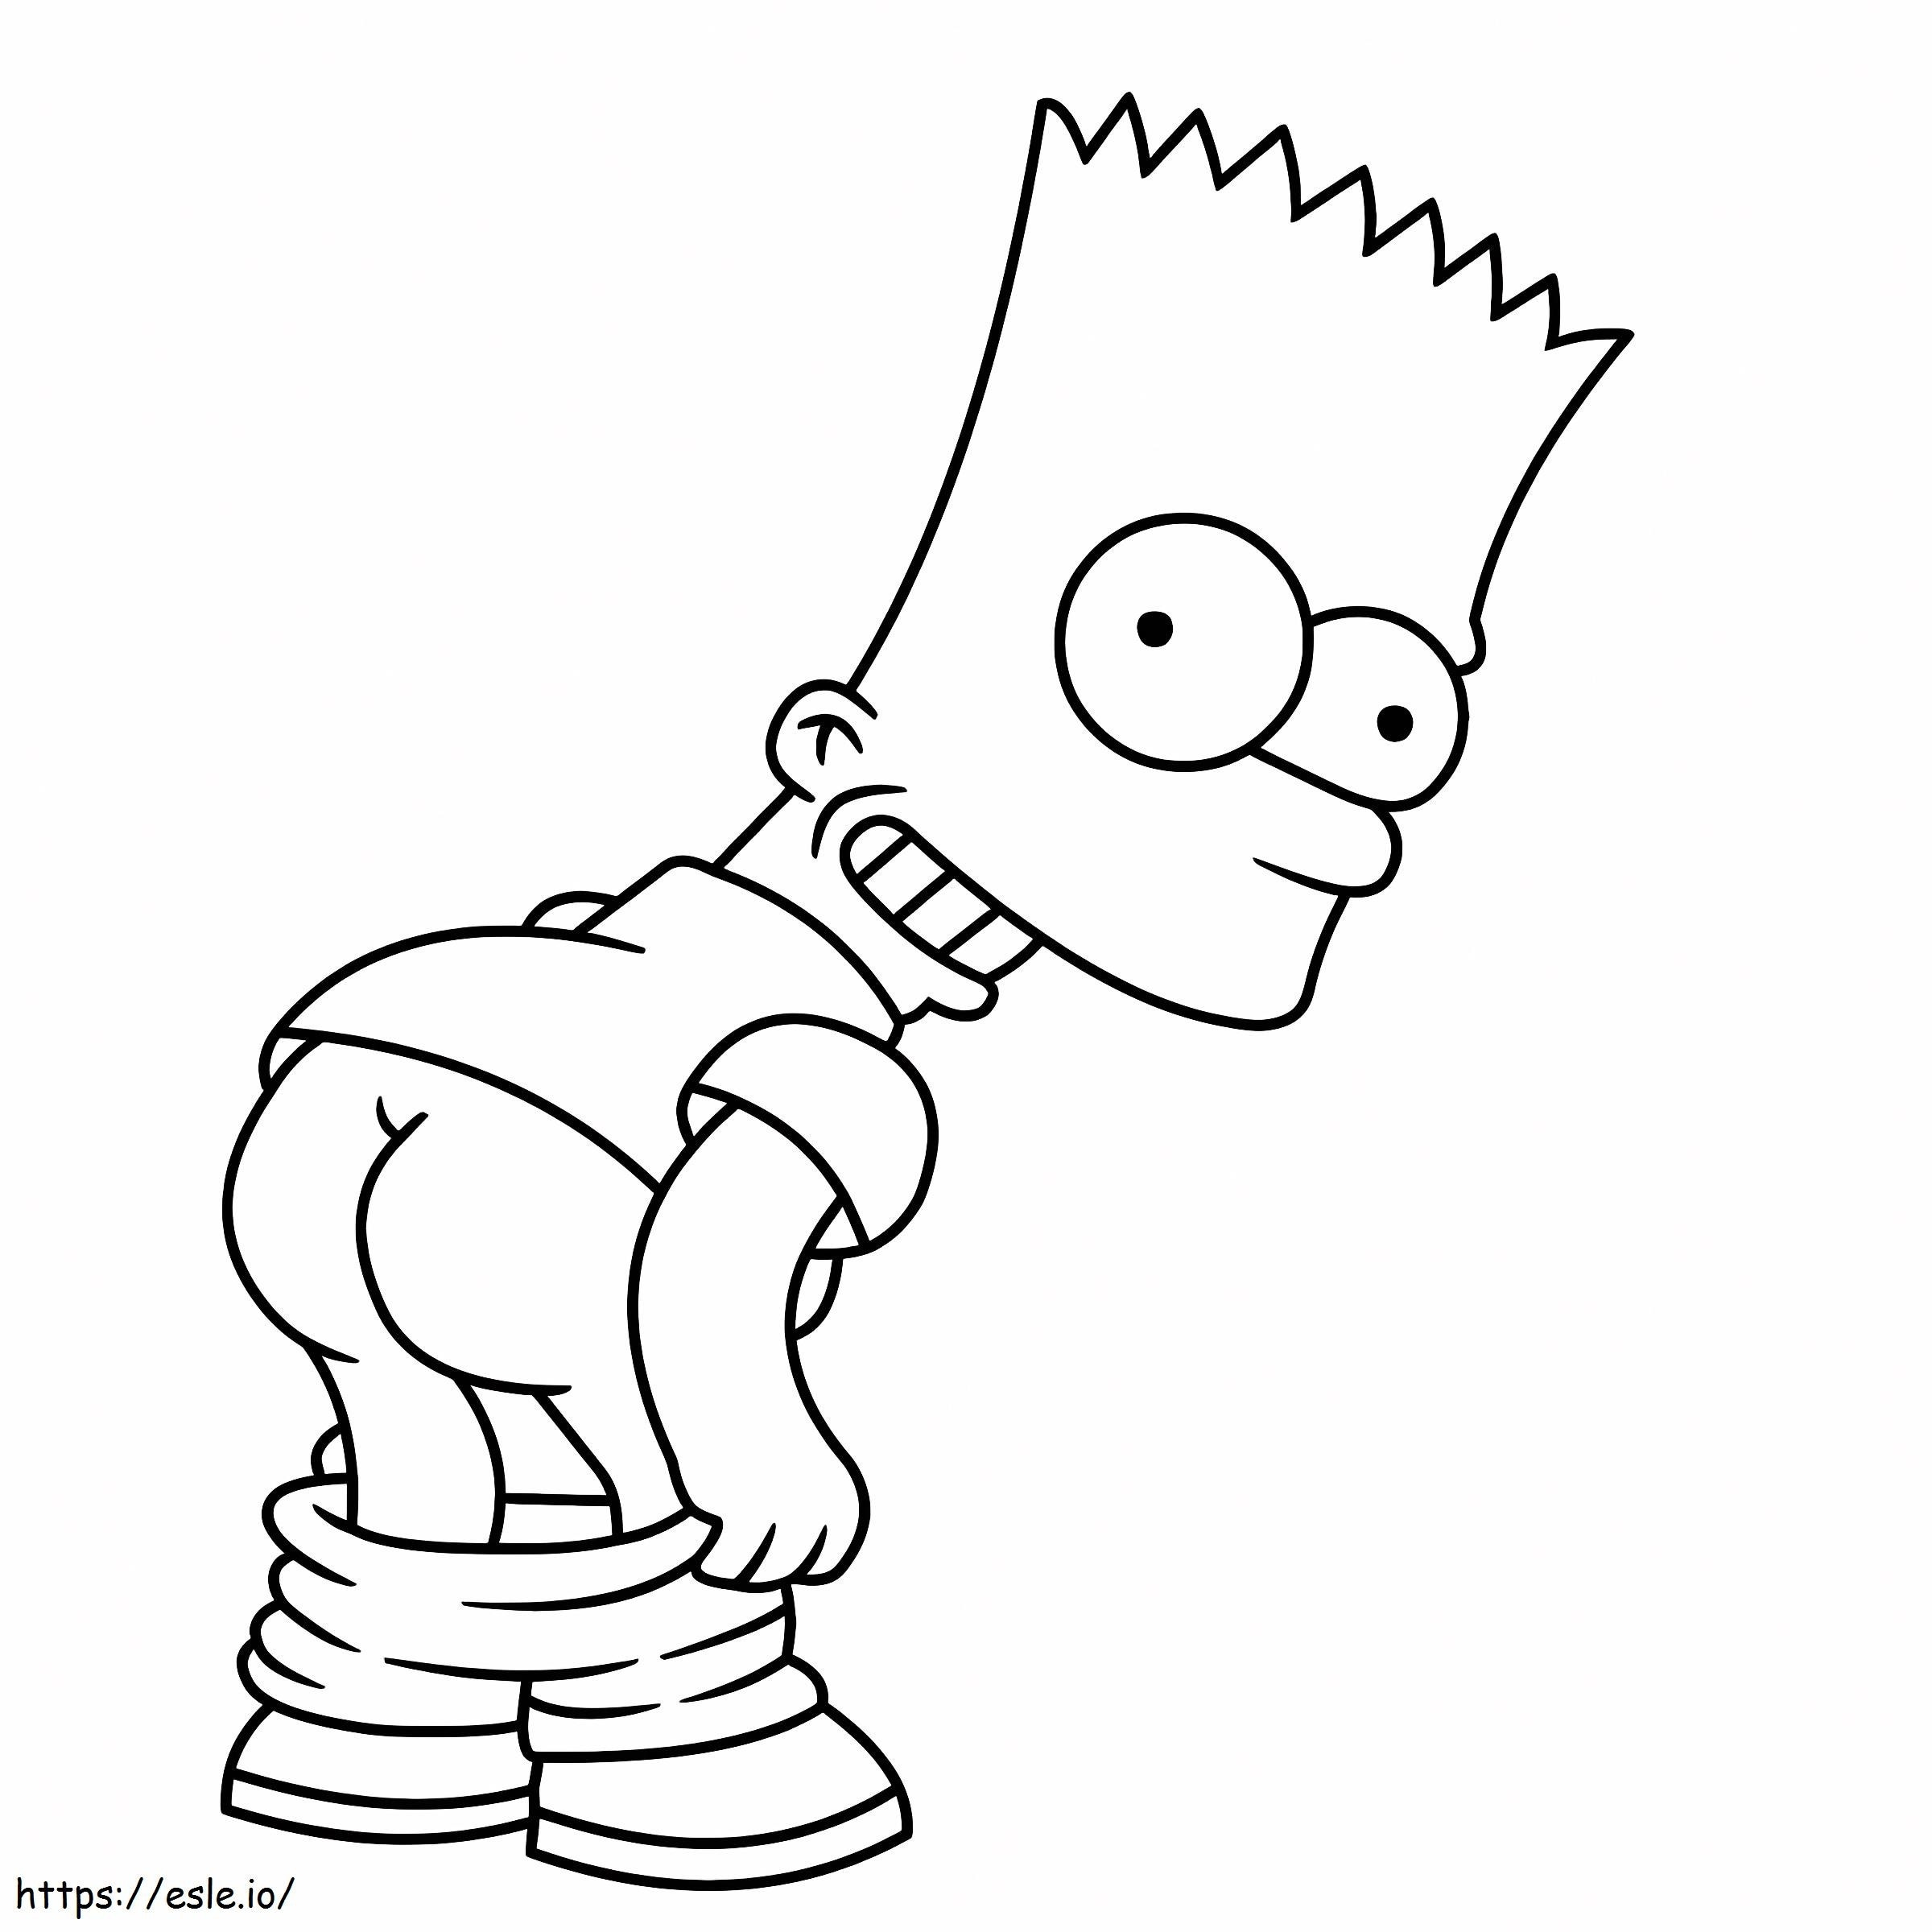 Bart Simpson Is coloring page